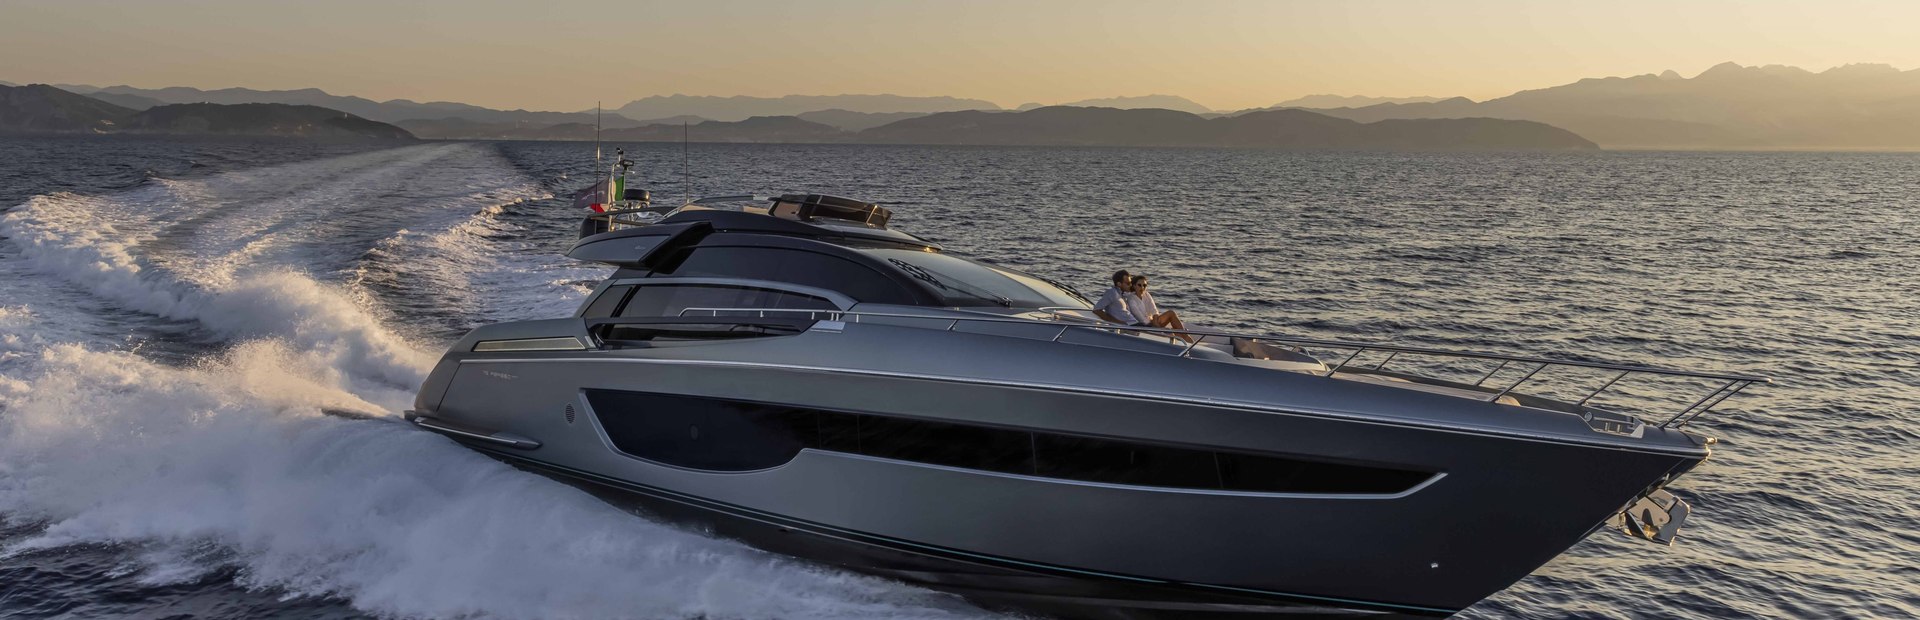 76 Perseo Super Yacht